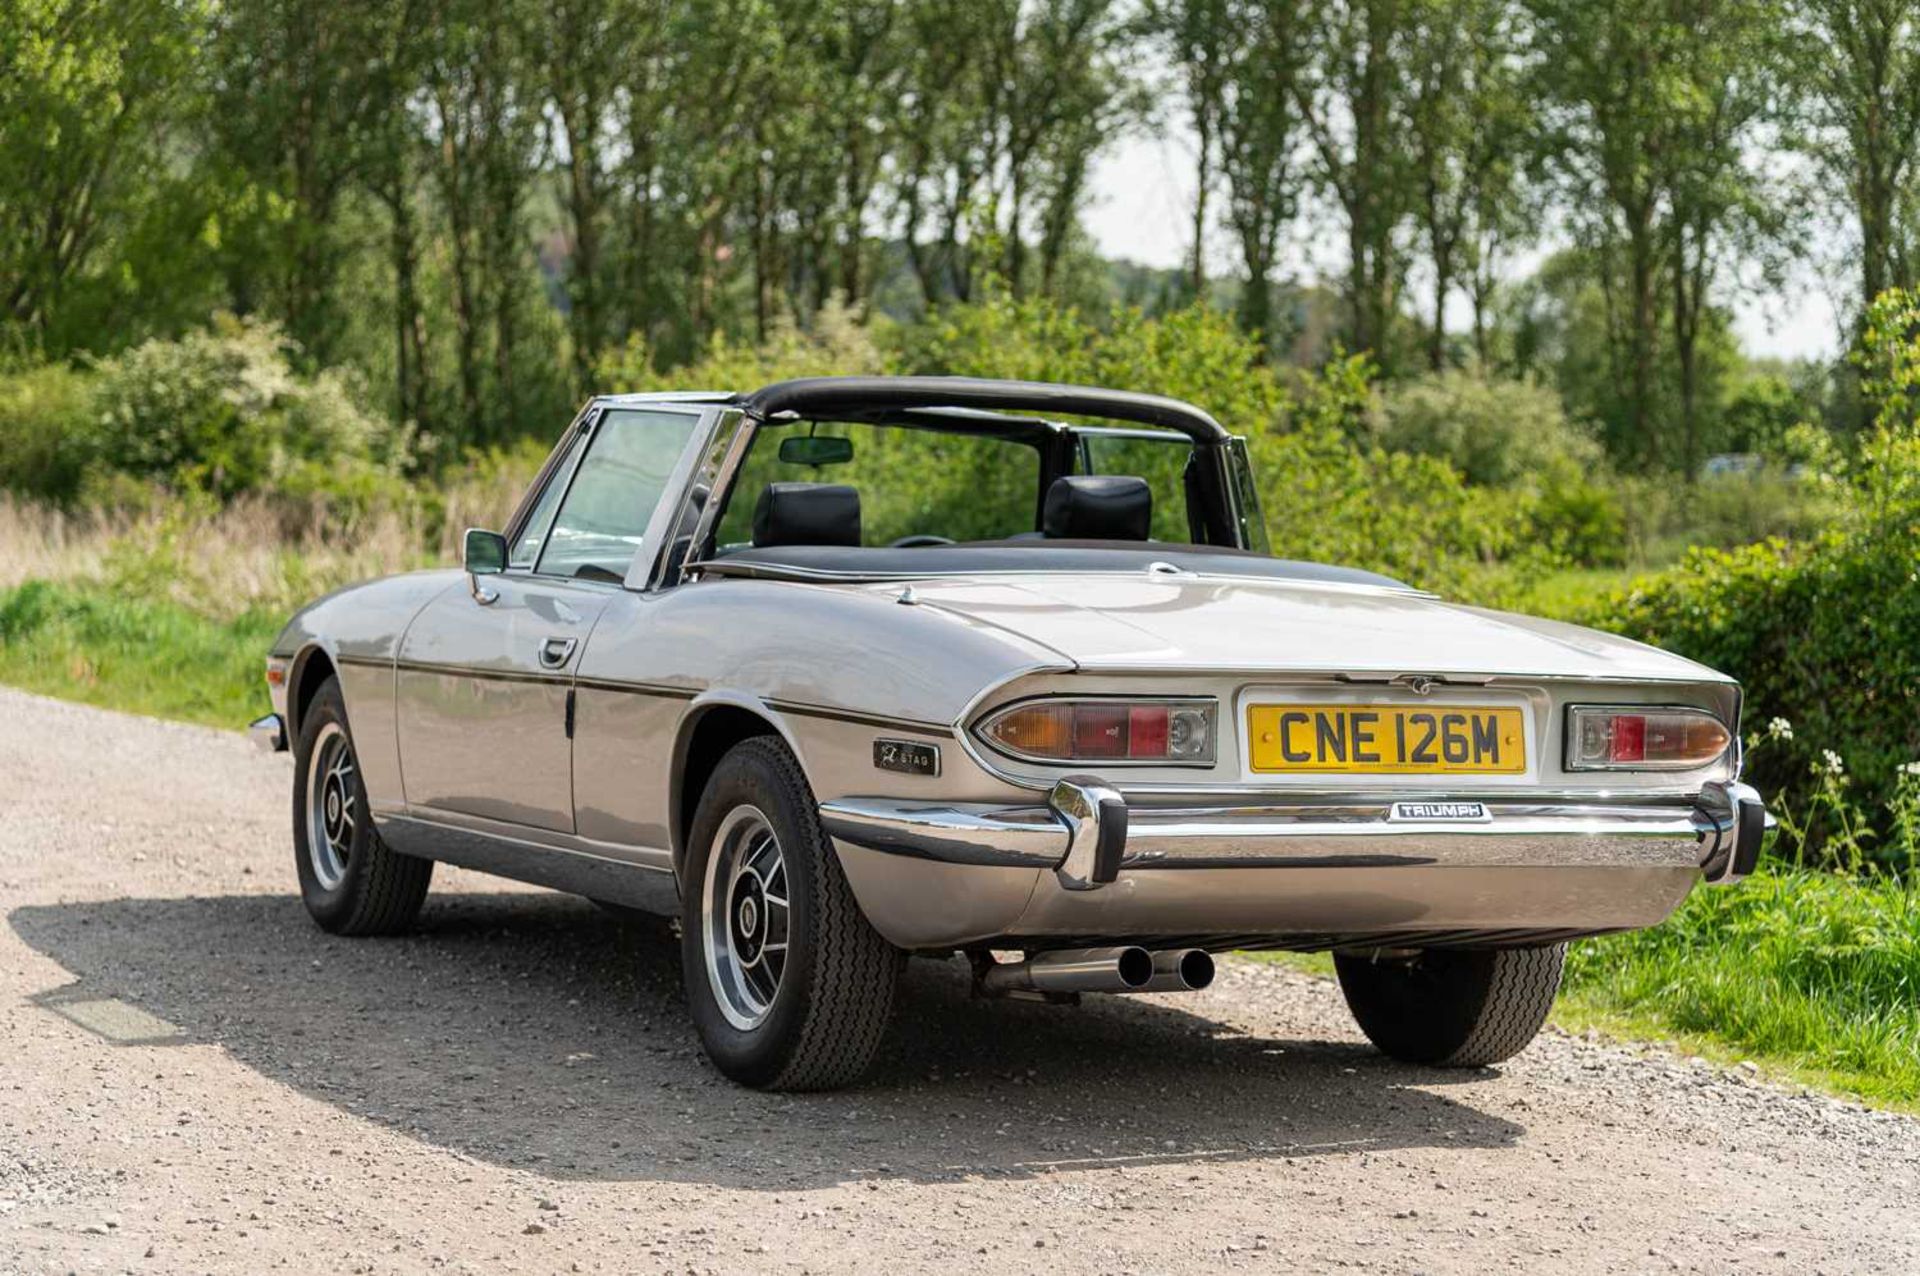 1974 Triumph Stag ***NO RESERVE*** Fully-restored example, equipped with manual overdrive transmissi - Image 18 of 83